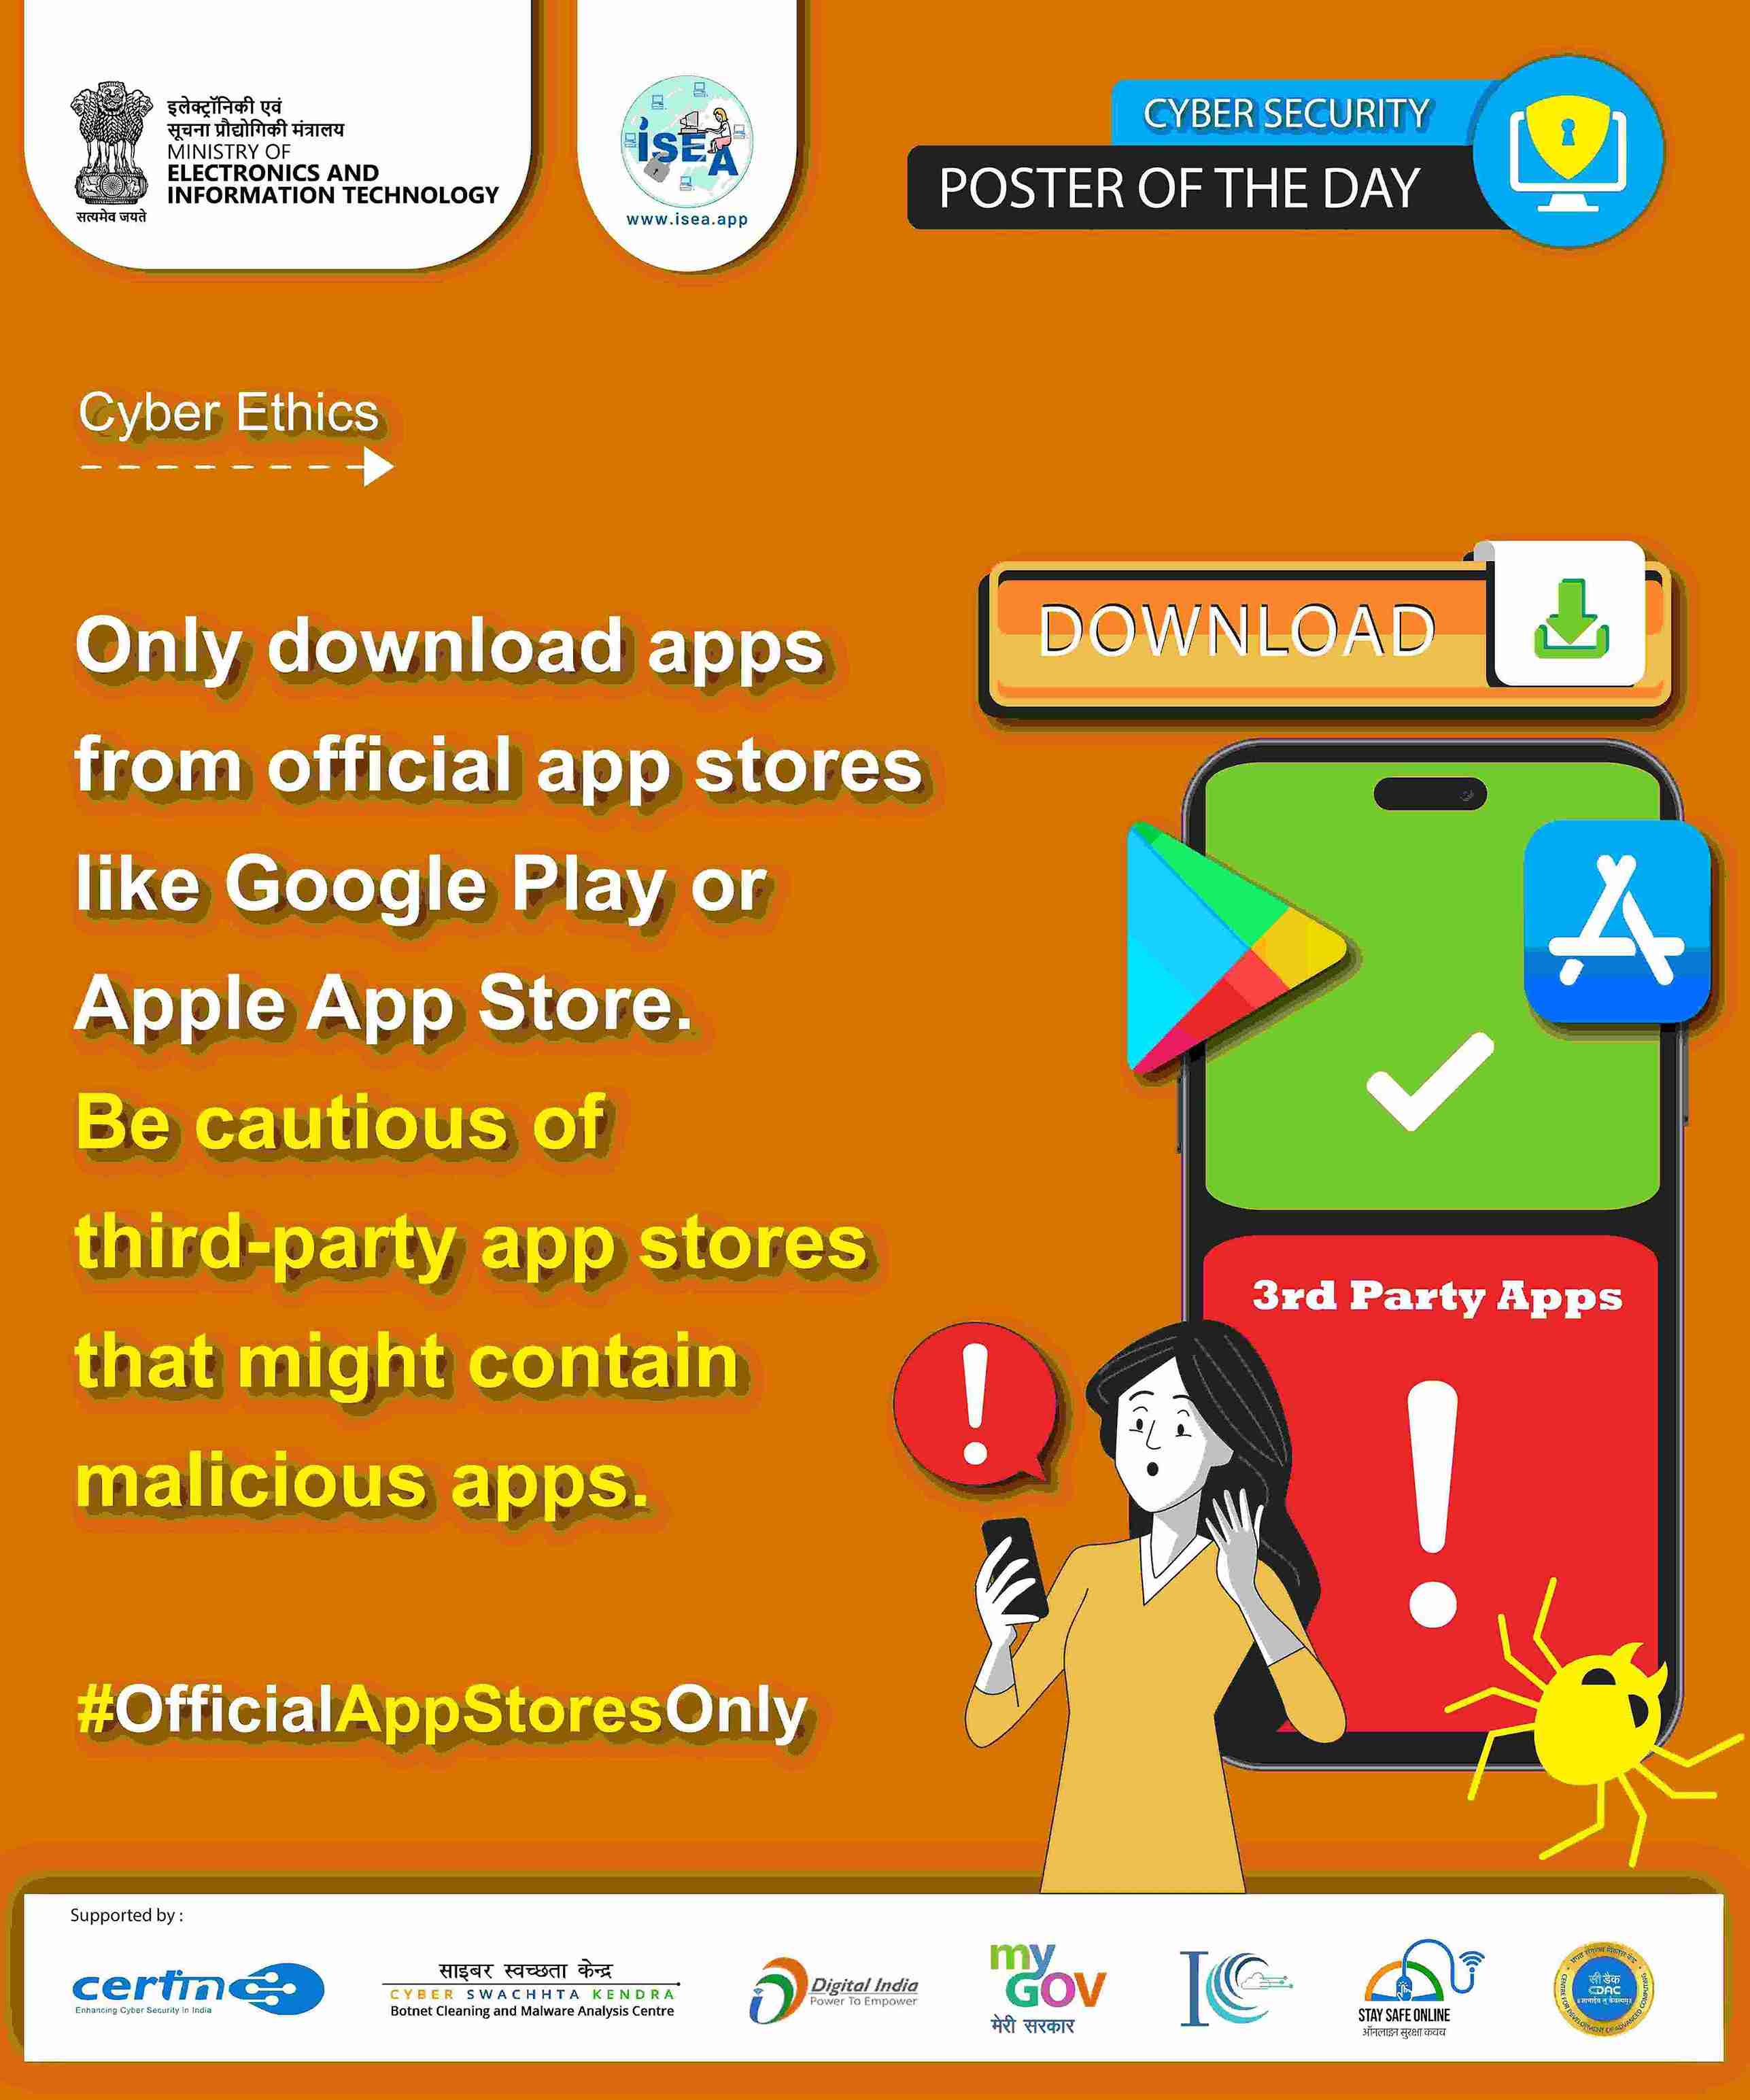 Official App Stores Only